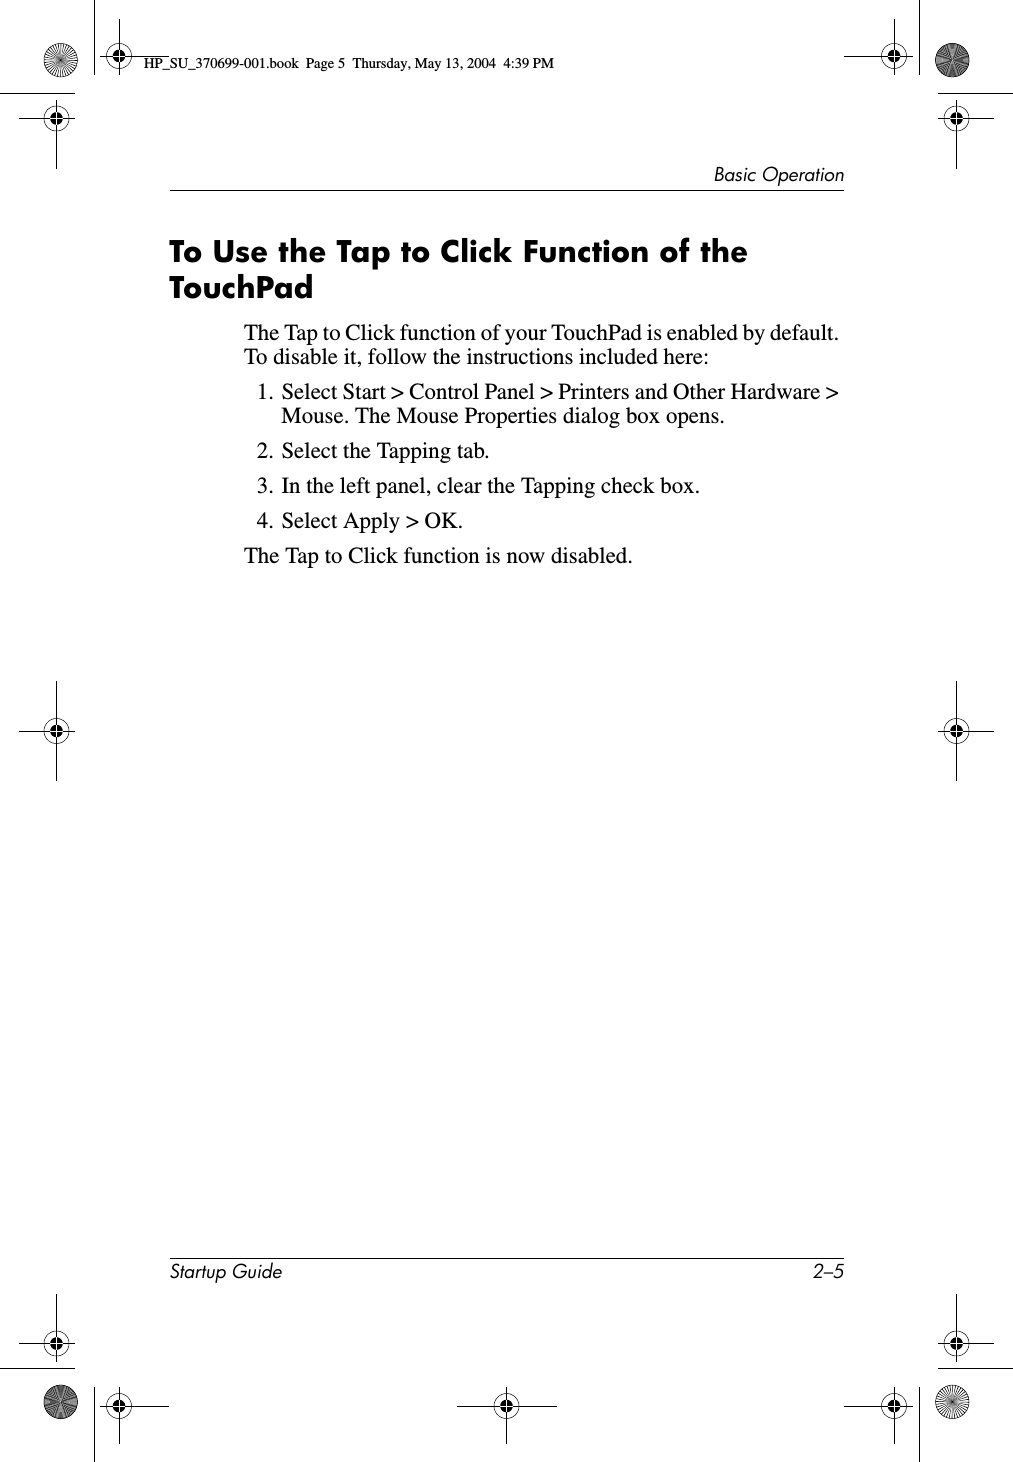 Basic OperationStartup Guide 2–5To Use the Tap to Click Function of the TouchPadThe Tap to Click function of your TouchPad is enabled by default. To disable it, follow the instructions included here:1. Select Start &gt; Control Panel &gt; Printers and Other Hardware &gt; Mouse. The Mouse Properties dialog box opens.2. Select the Tapping tab.3. In the left panel, clear the Tapping check box. 4. Select Apply &gt; OK.The Tap to Click function is now disabled.HP_SU_370699-001.book  Page 5  Thursday, May 13, 2004  4:39 PM